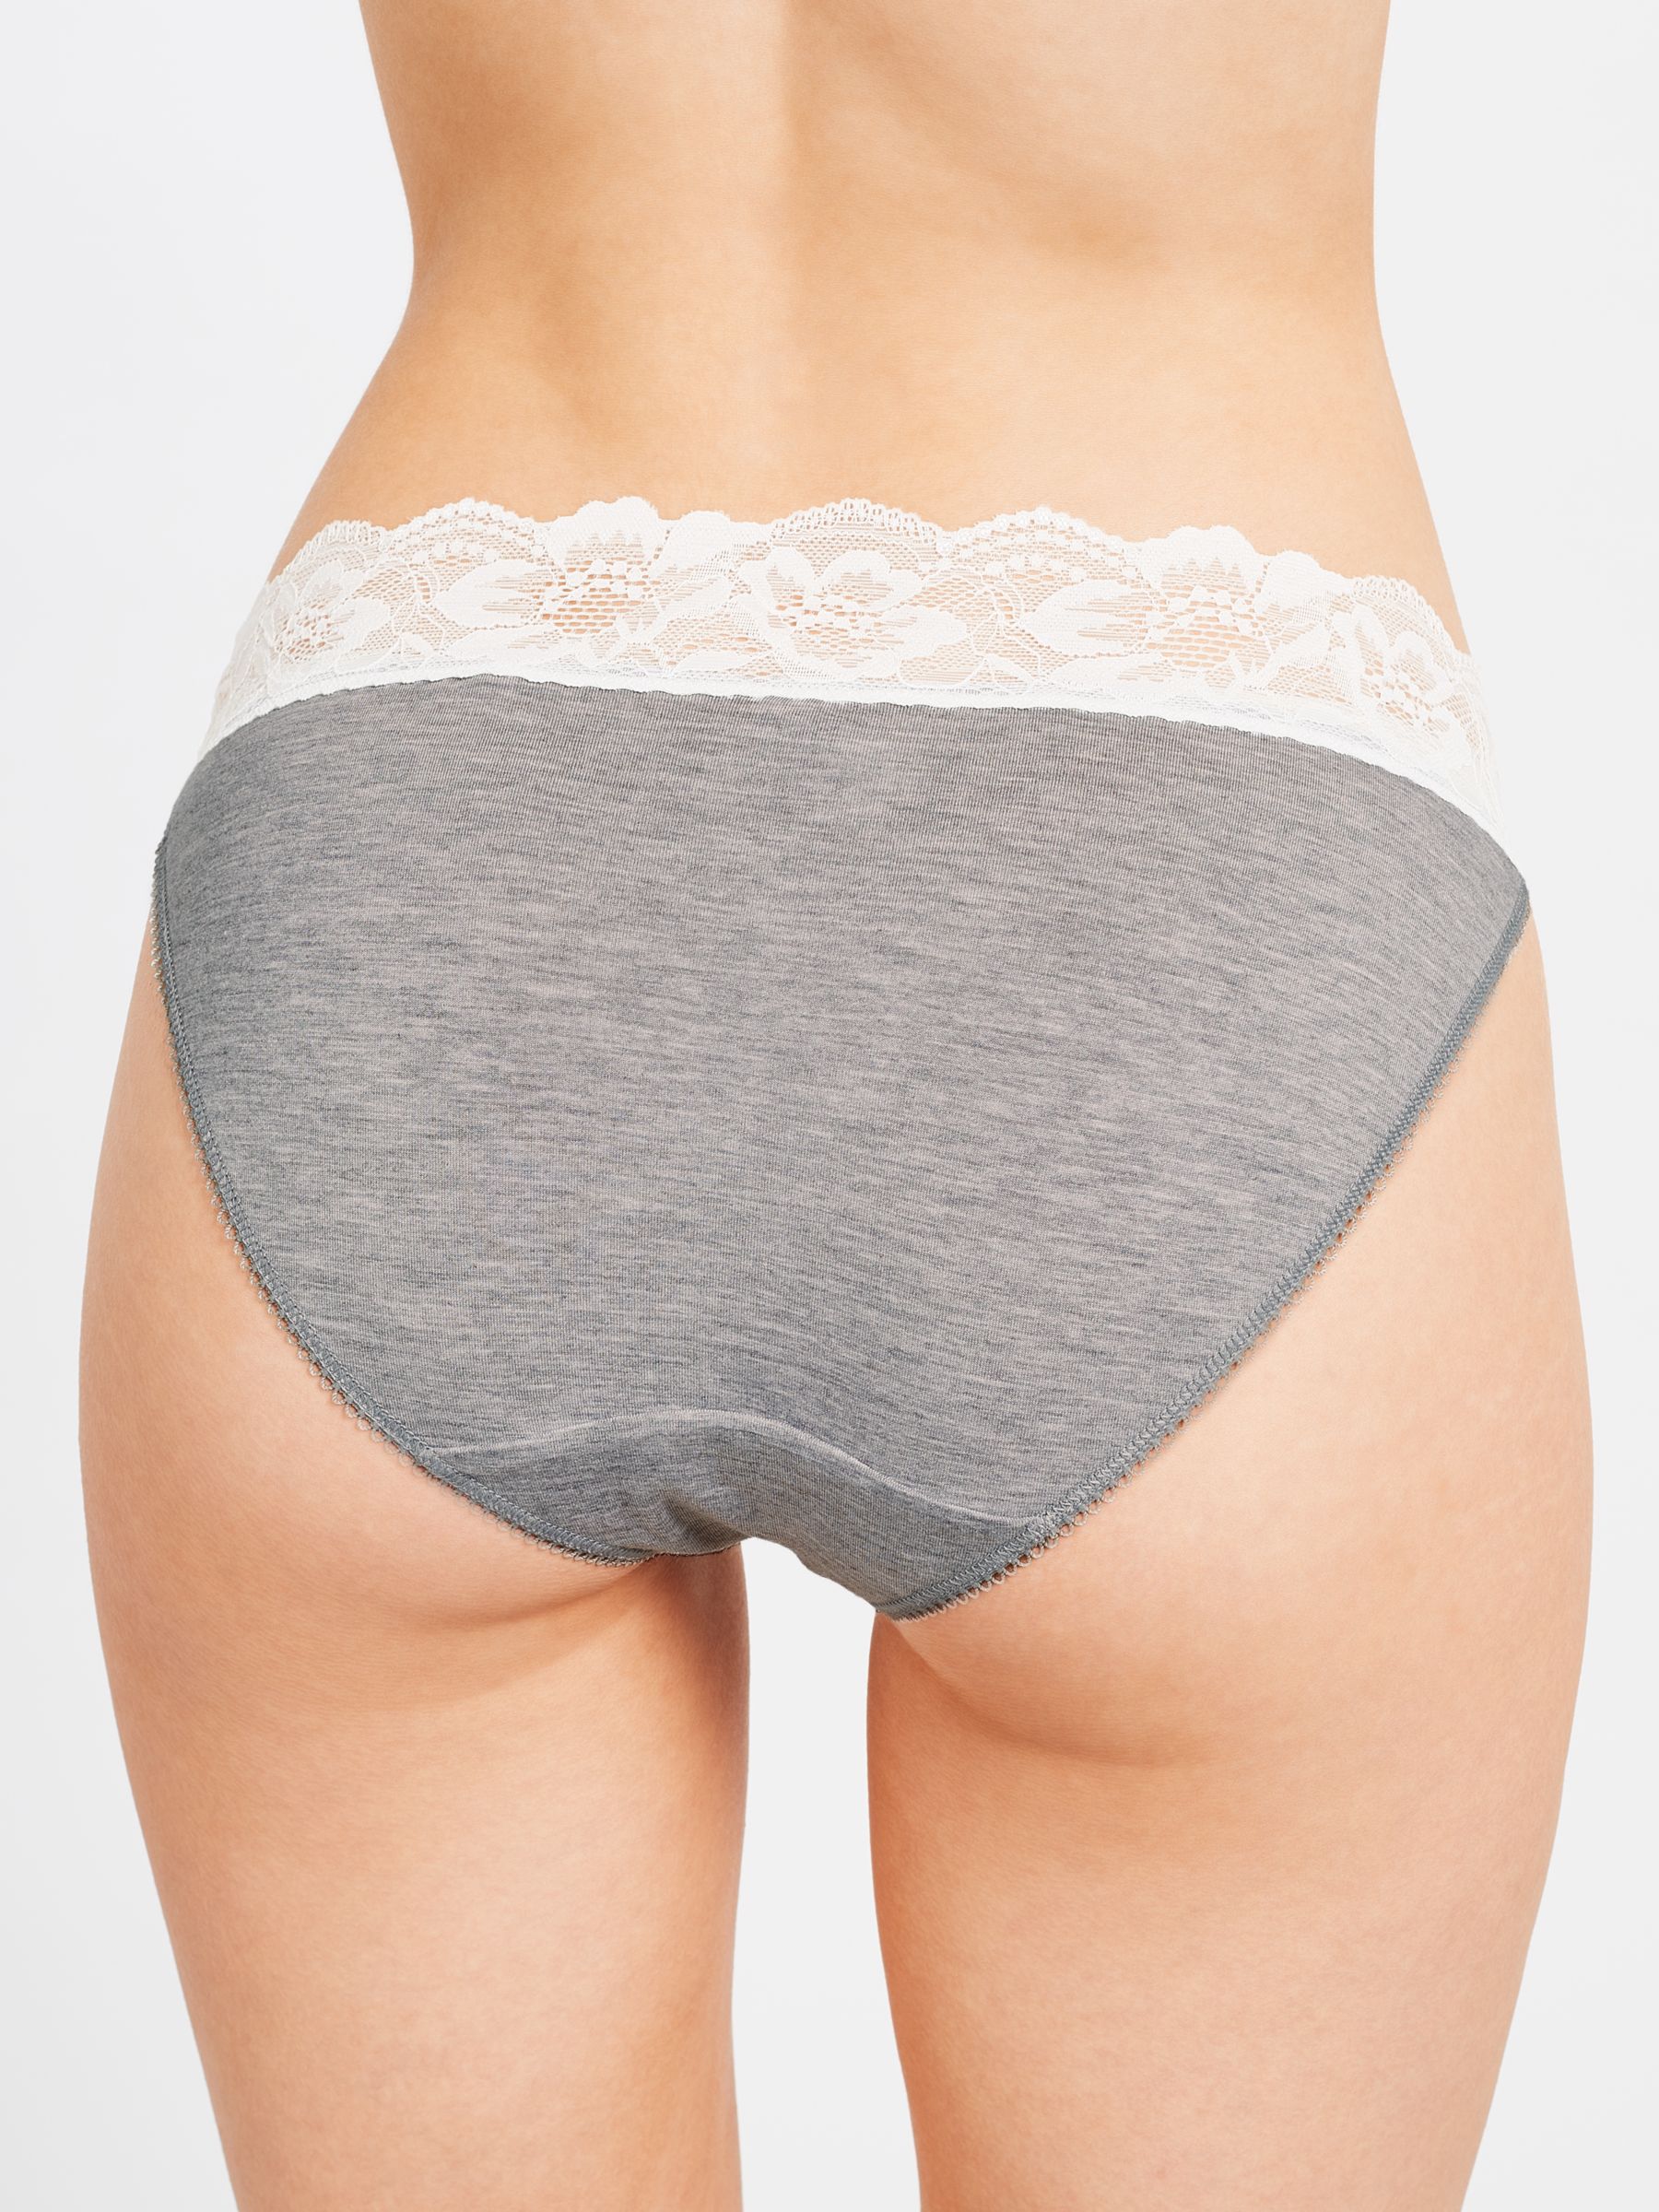 John Lewis ANYDAY Lace Trim Tanga Knickers, Pack of 3, Grey Marl/Cream, 10